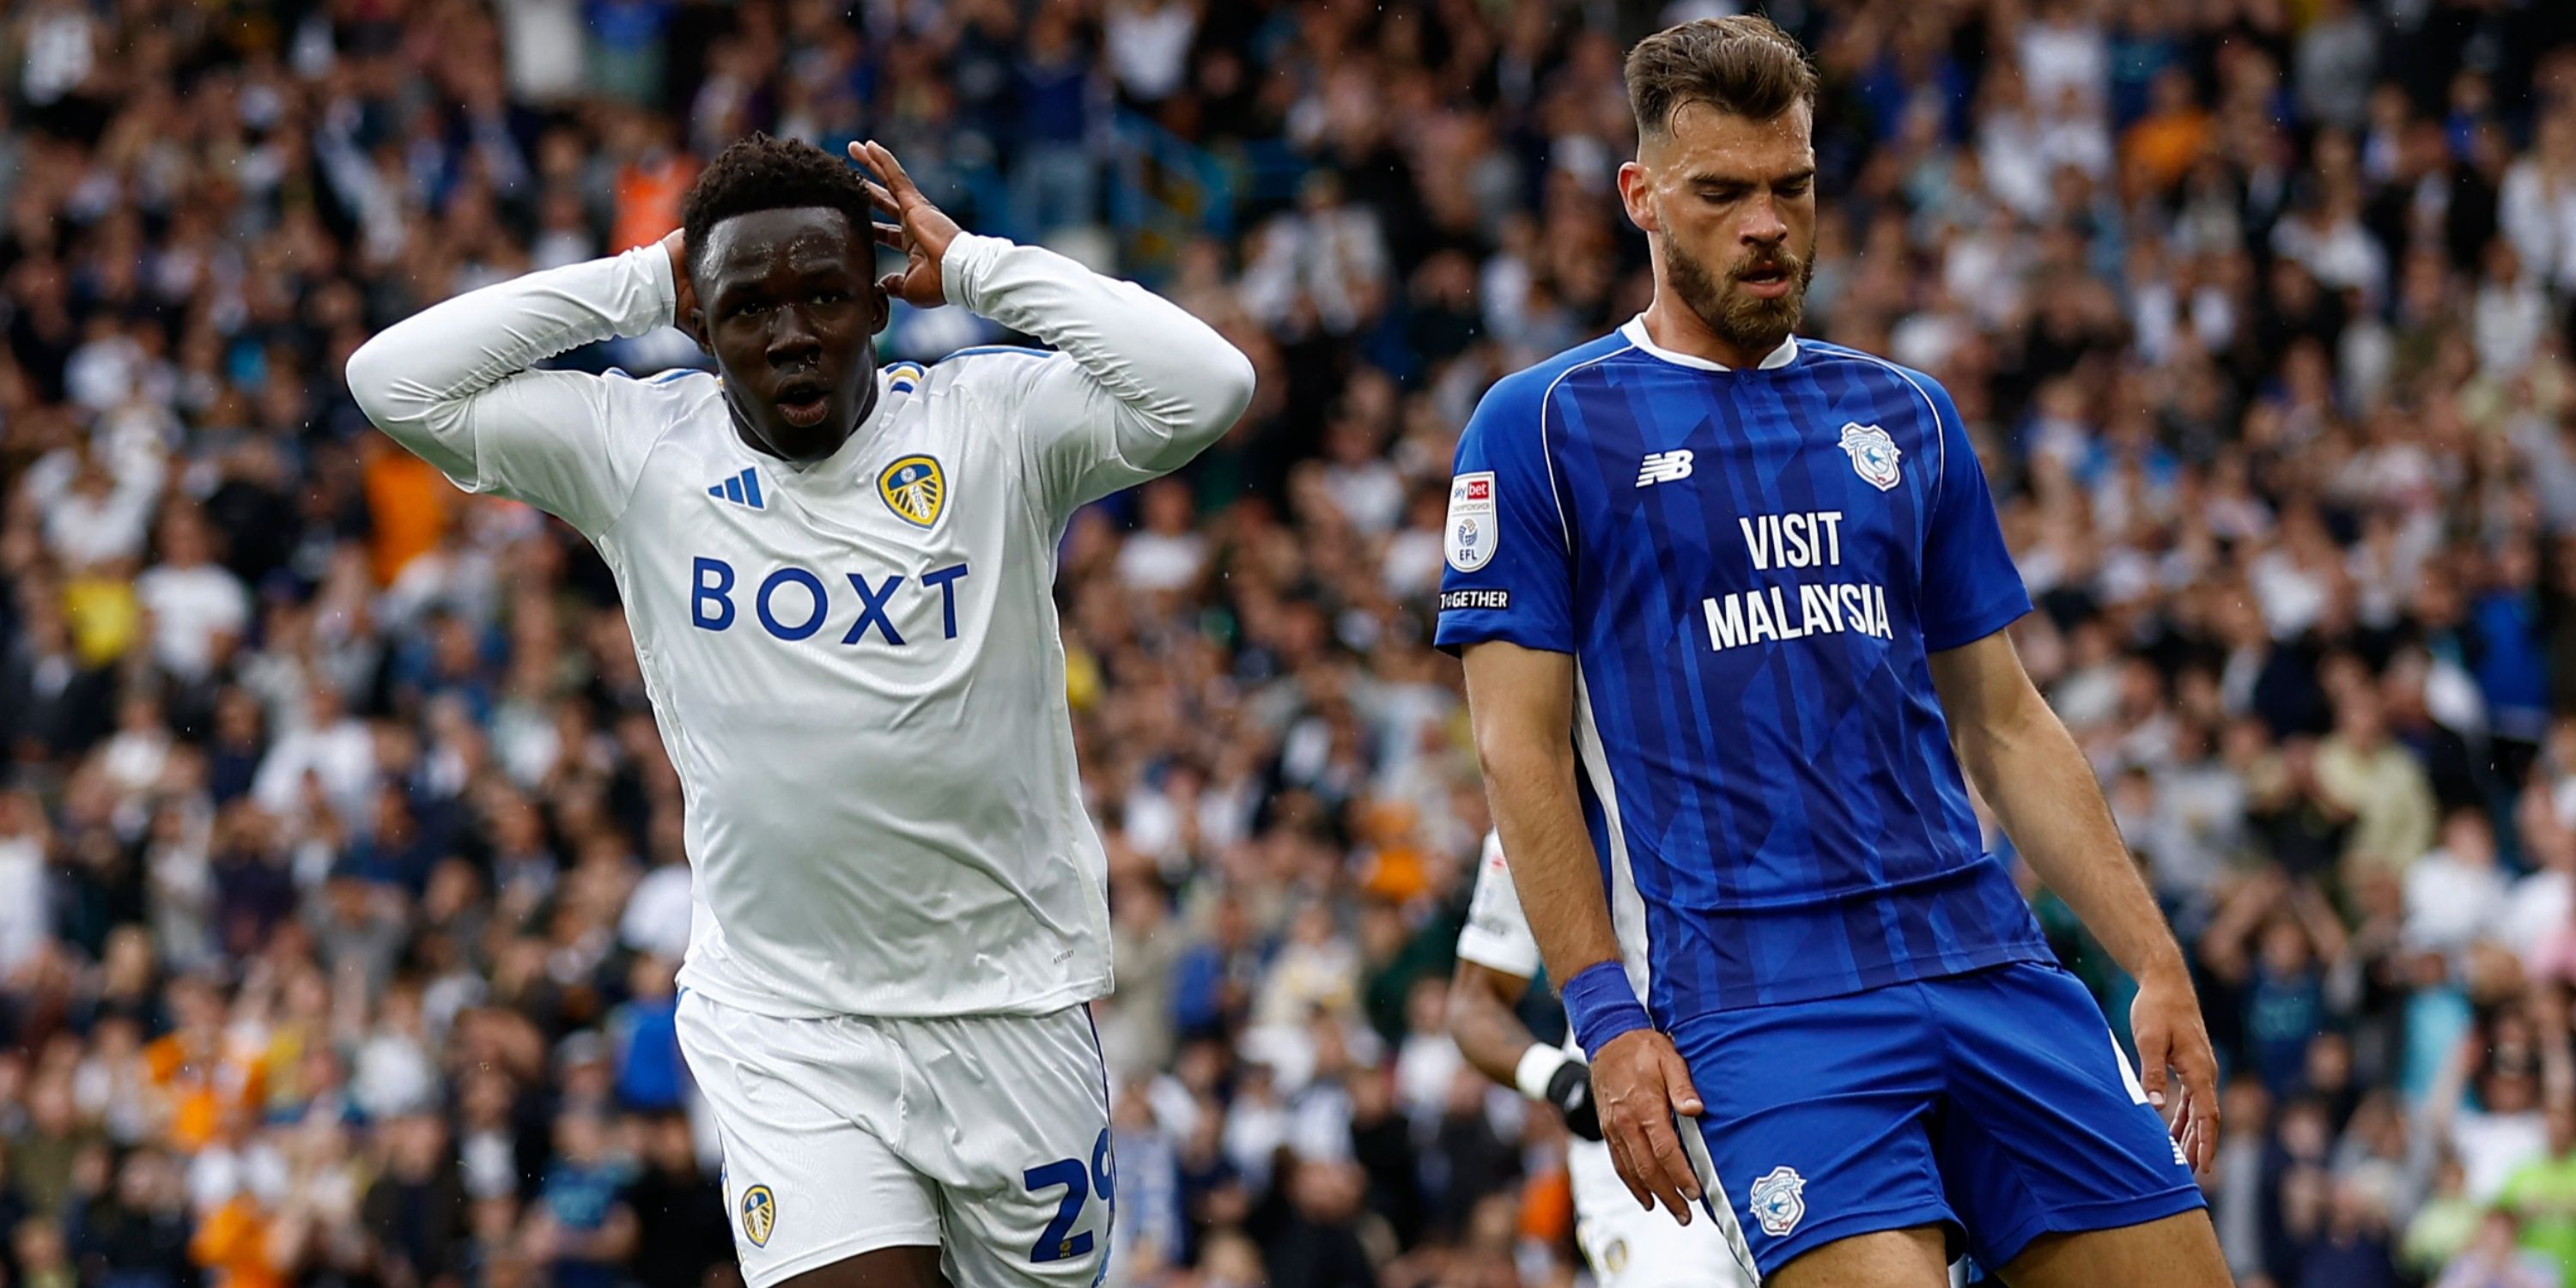 Farke could supercharge Gnonto by unleashing Leeds' £14k-p/w star